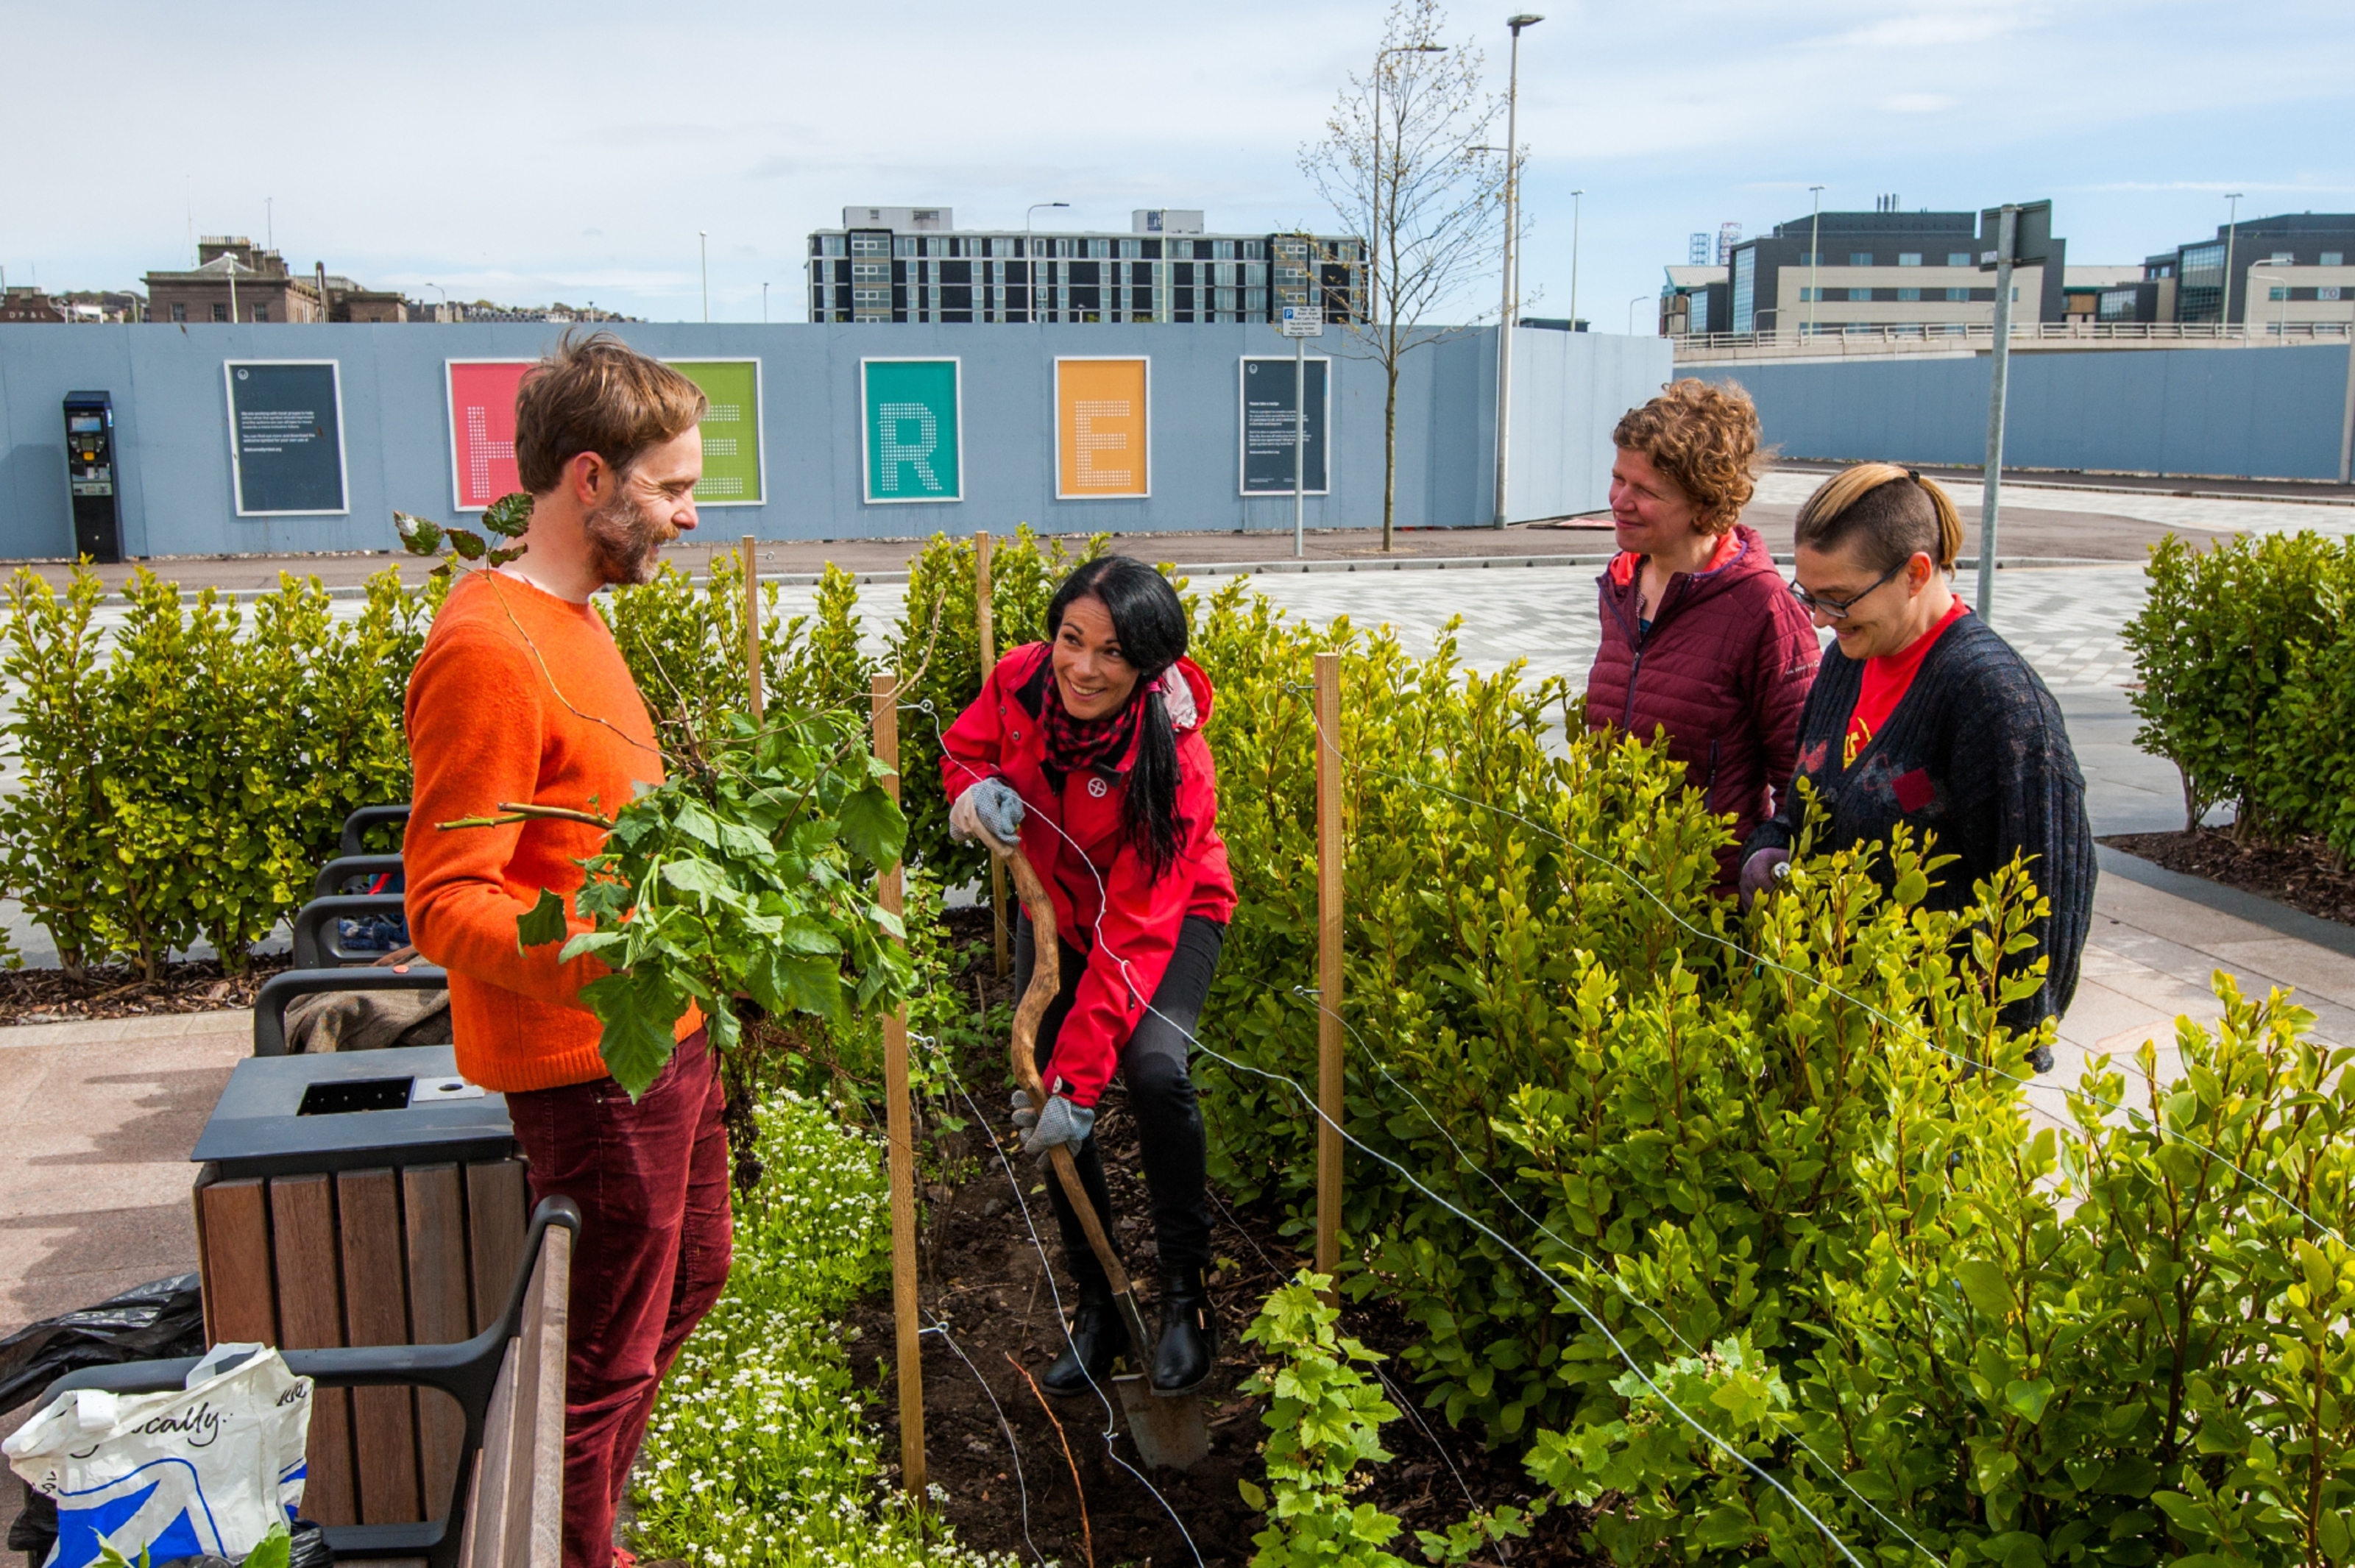 Jonathan Baxter, Gayle Ritchie, Sarah Gittins and Shonagh Glen. Slessor Gardens in the edible garden and orchard in Dundee's Slessor Gardens.